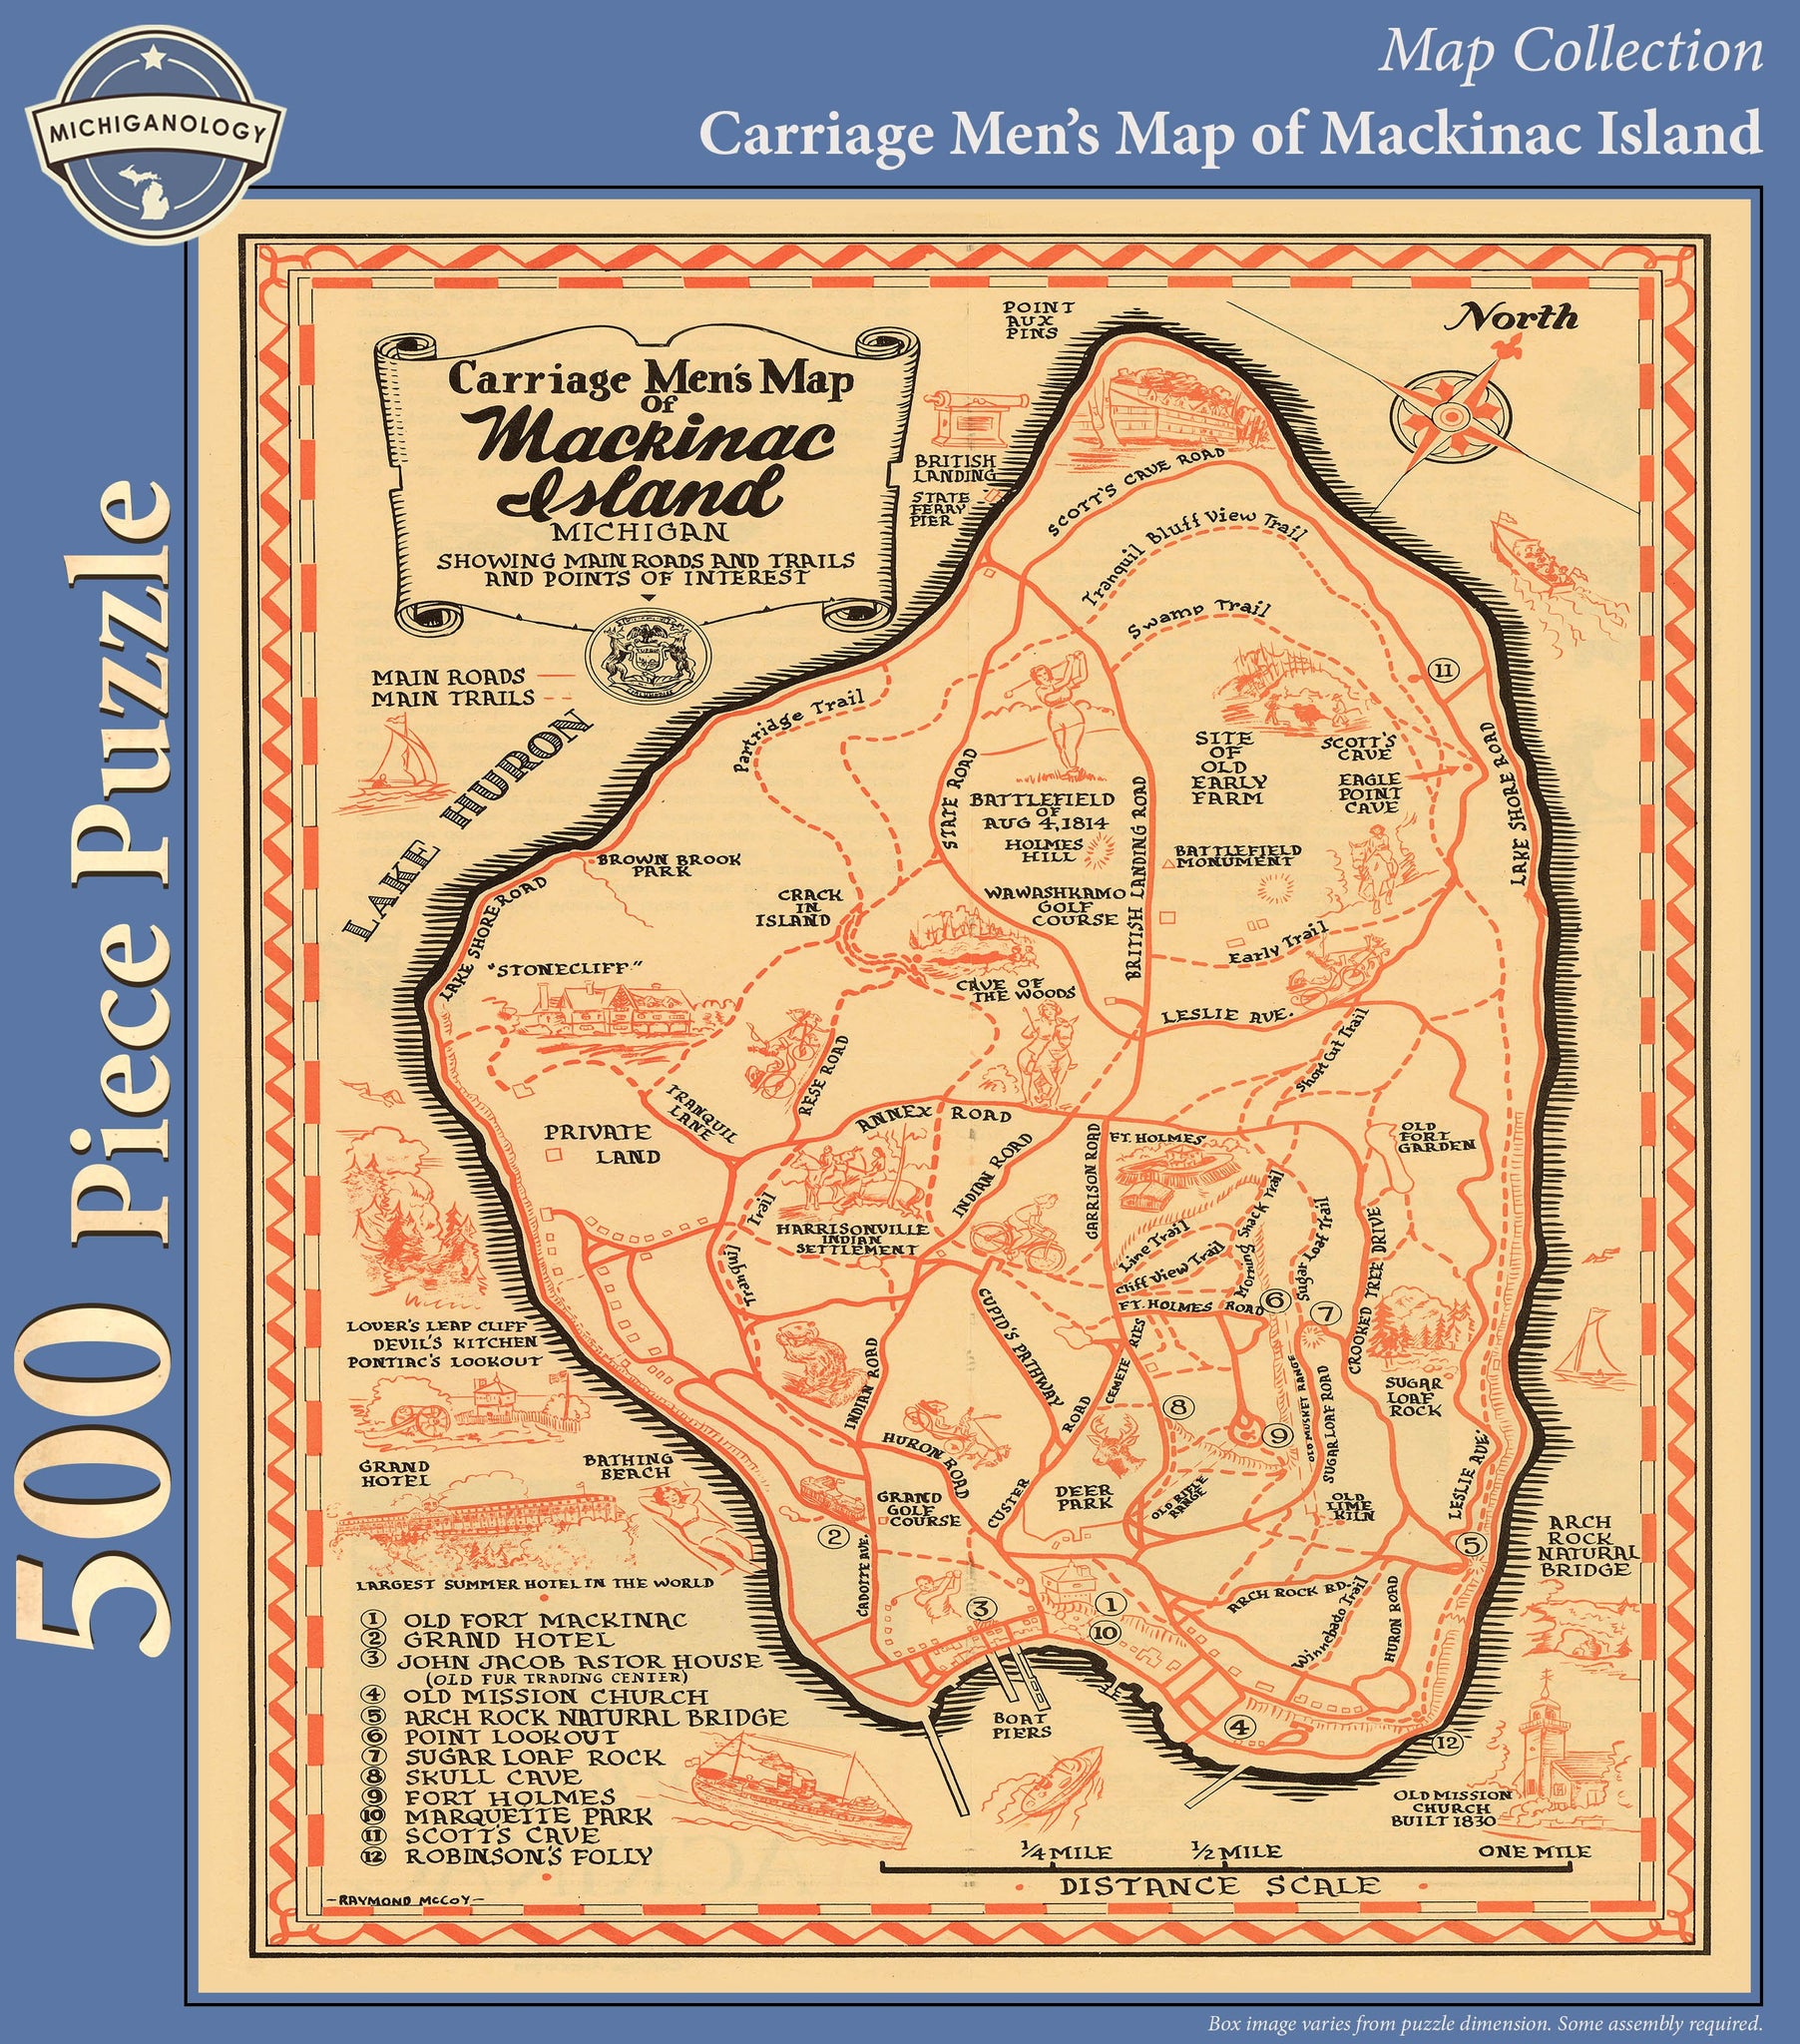 Carriage Men’s Map of Mackinac Island Puzzle